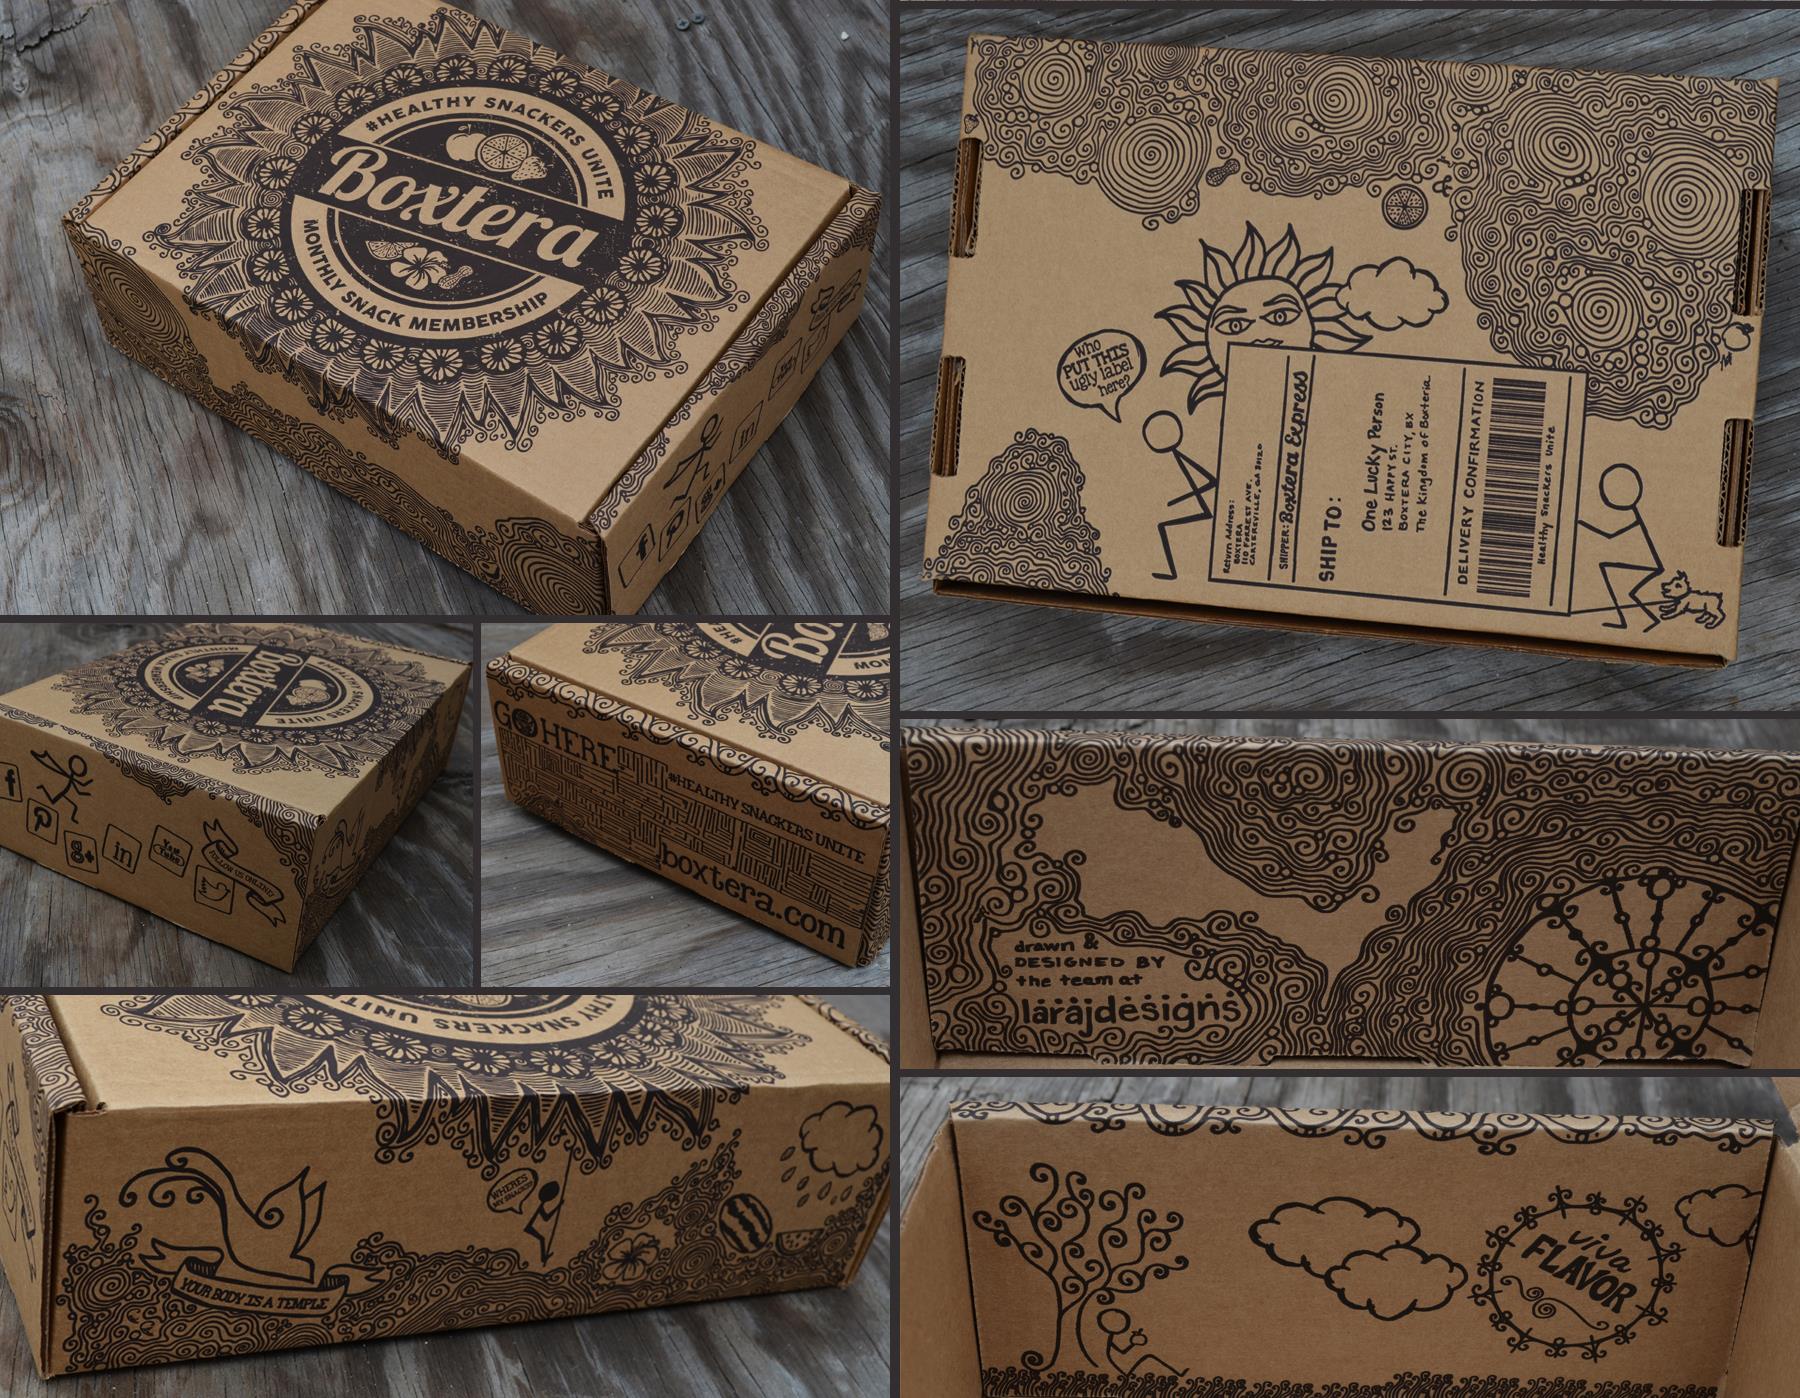 Boxtera Product Packaging Design